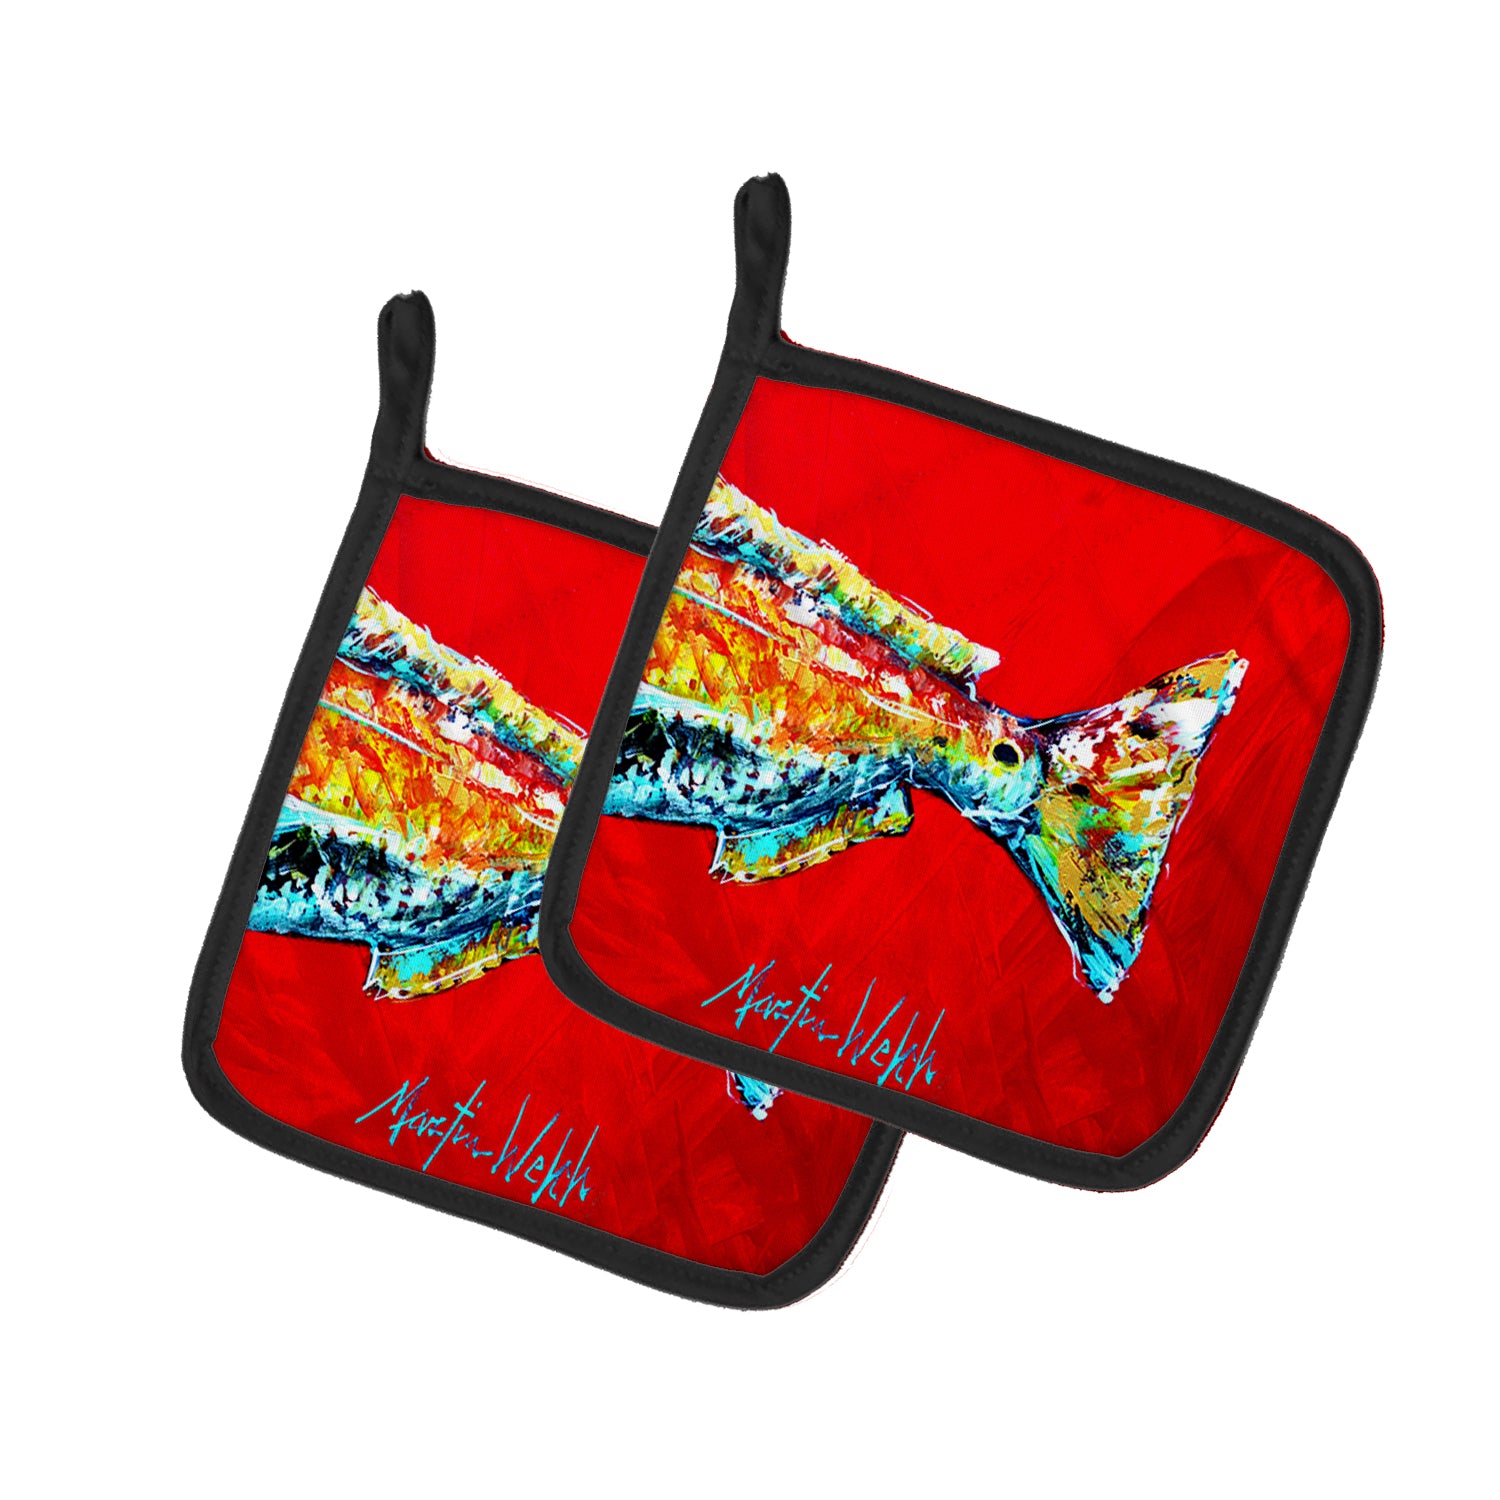 Buy this Red Fish Alphonzo Tail Pair of Pot Holders